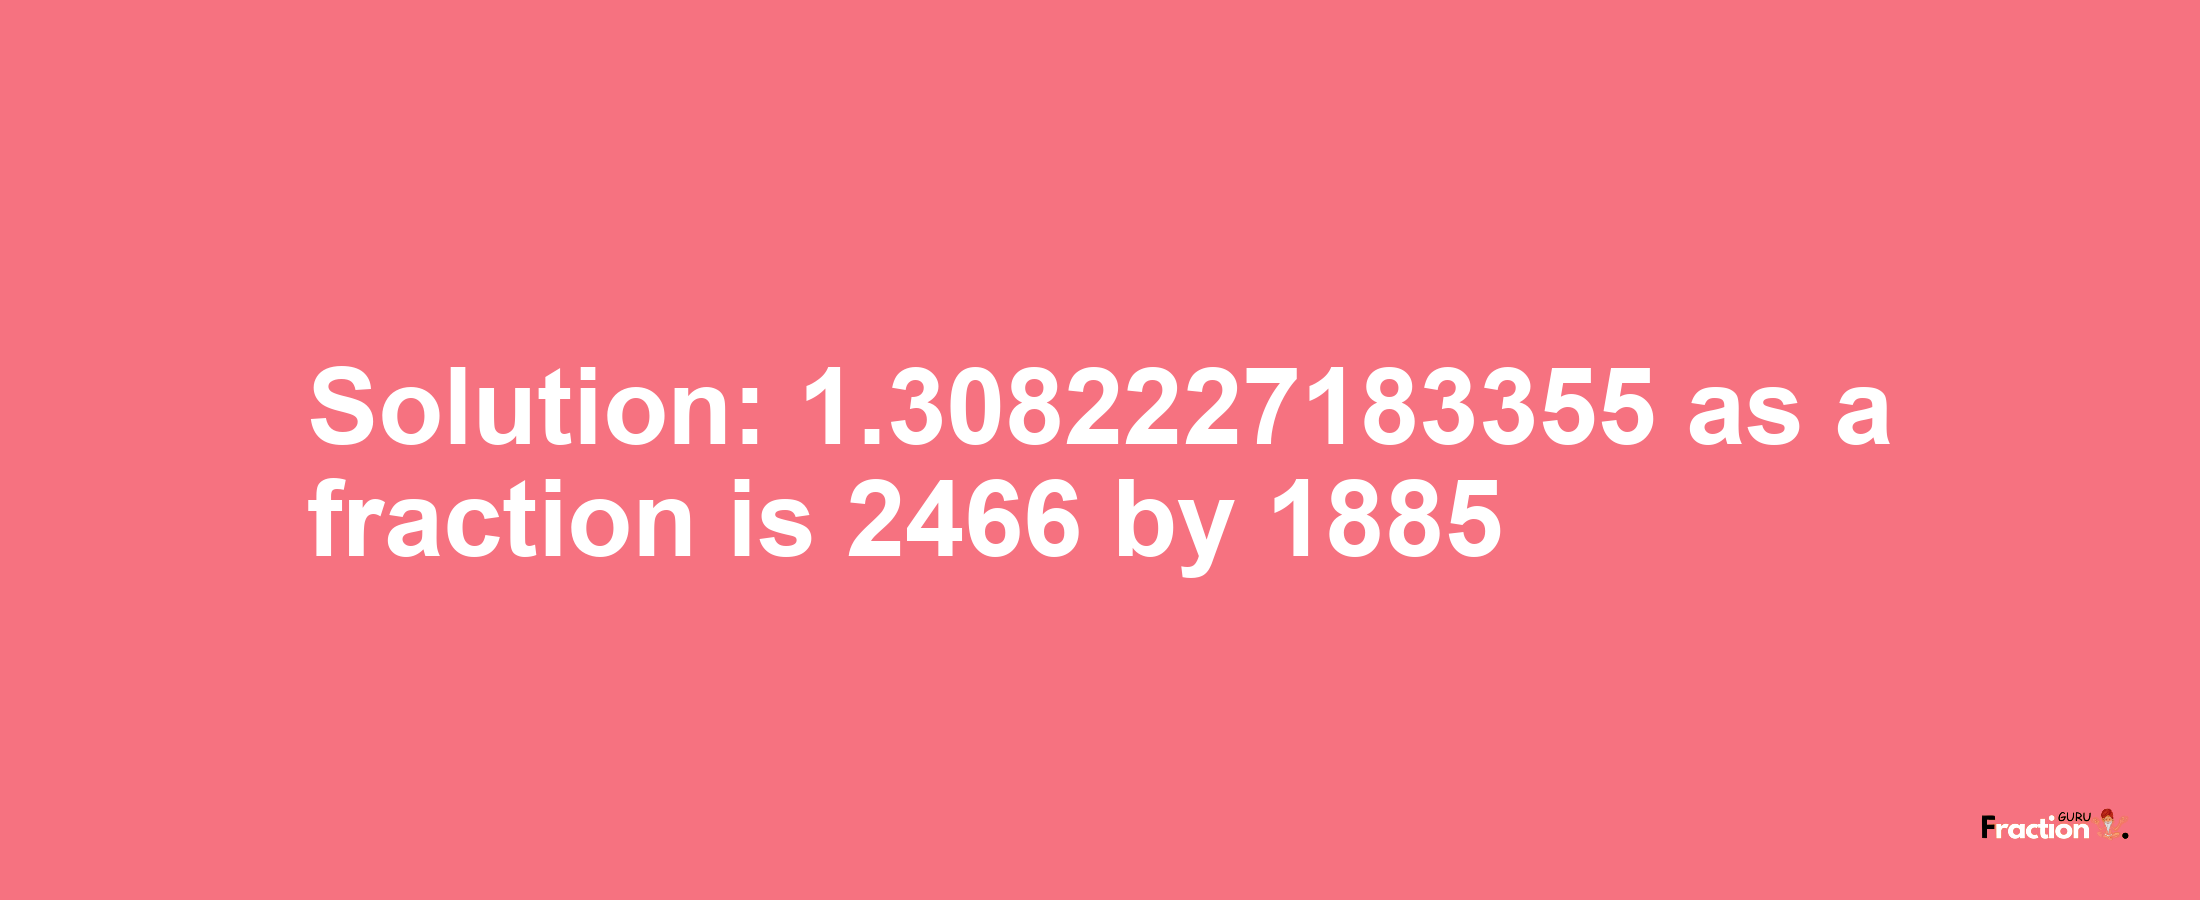 Solution:1.3082227183355 as a fraction is 2466/1885